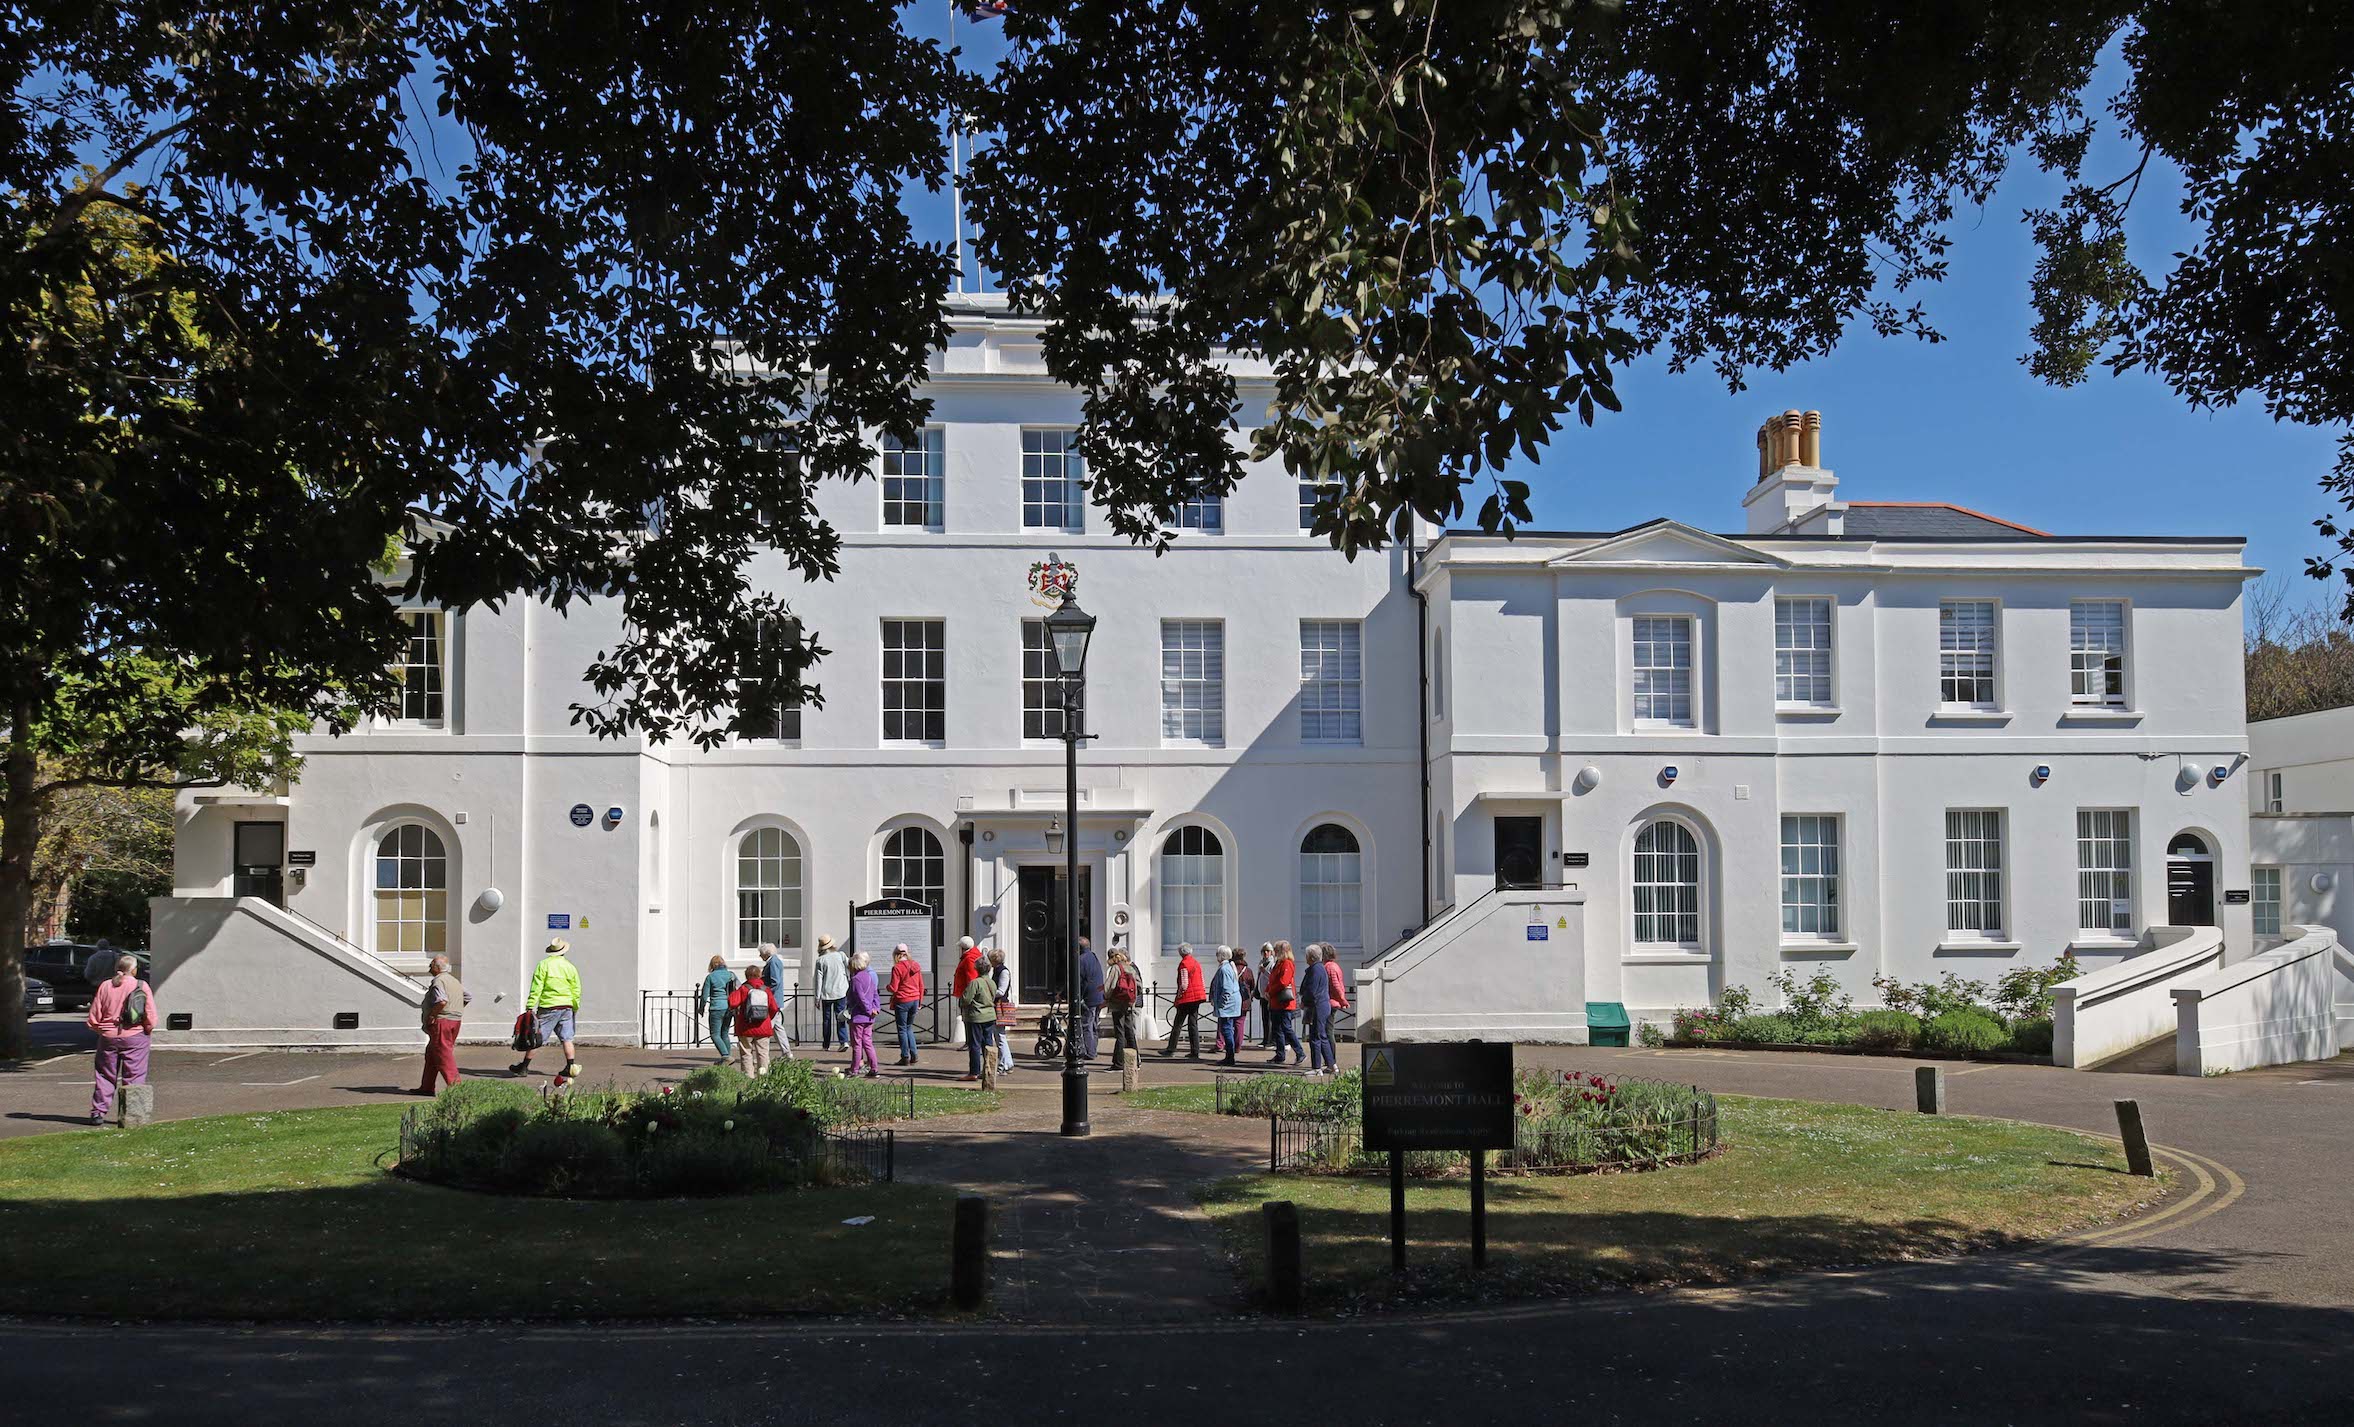 A trip to Pierremont Park, Broadstairs